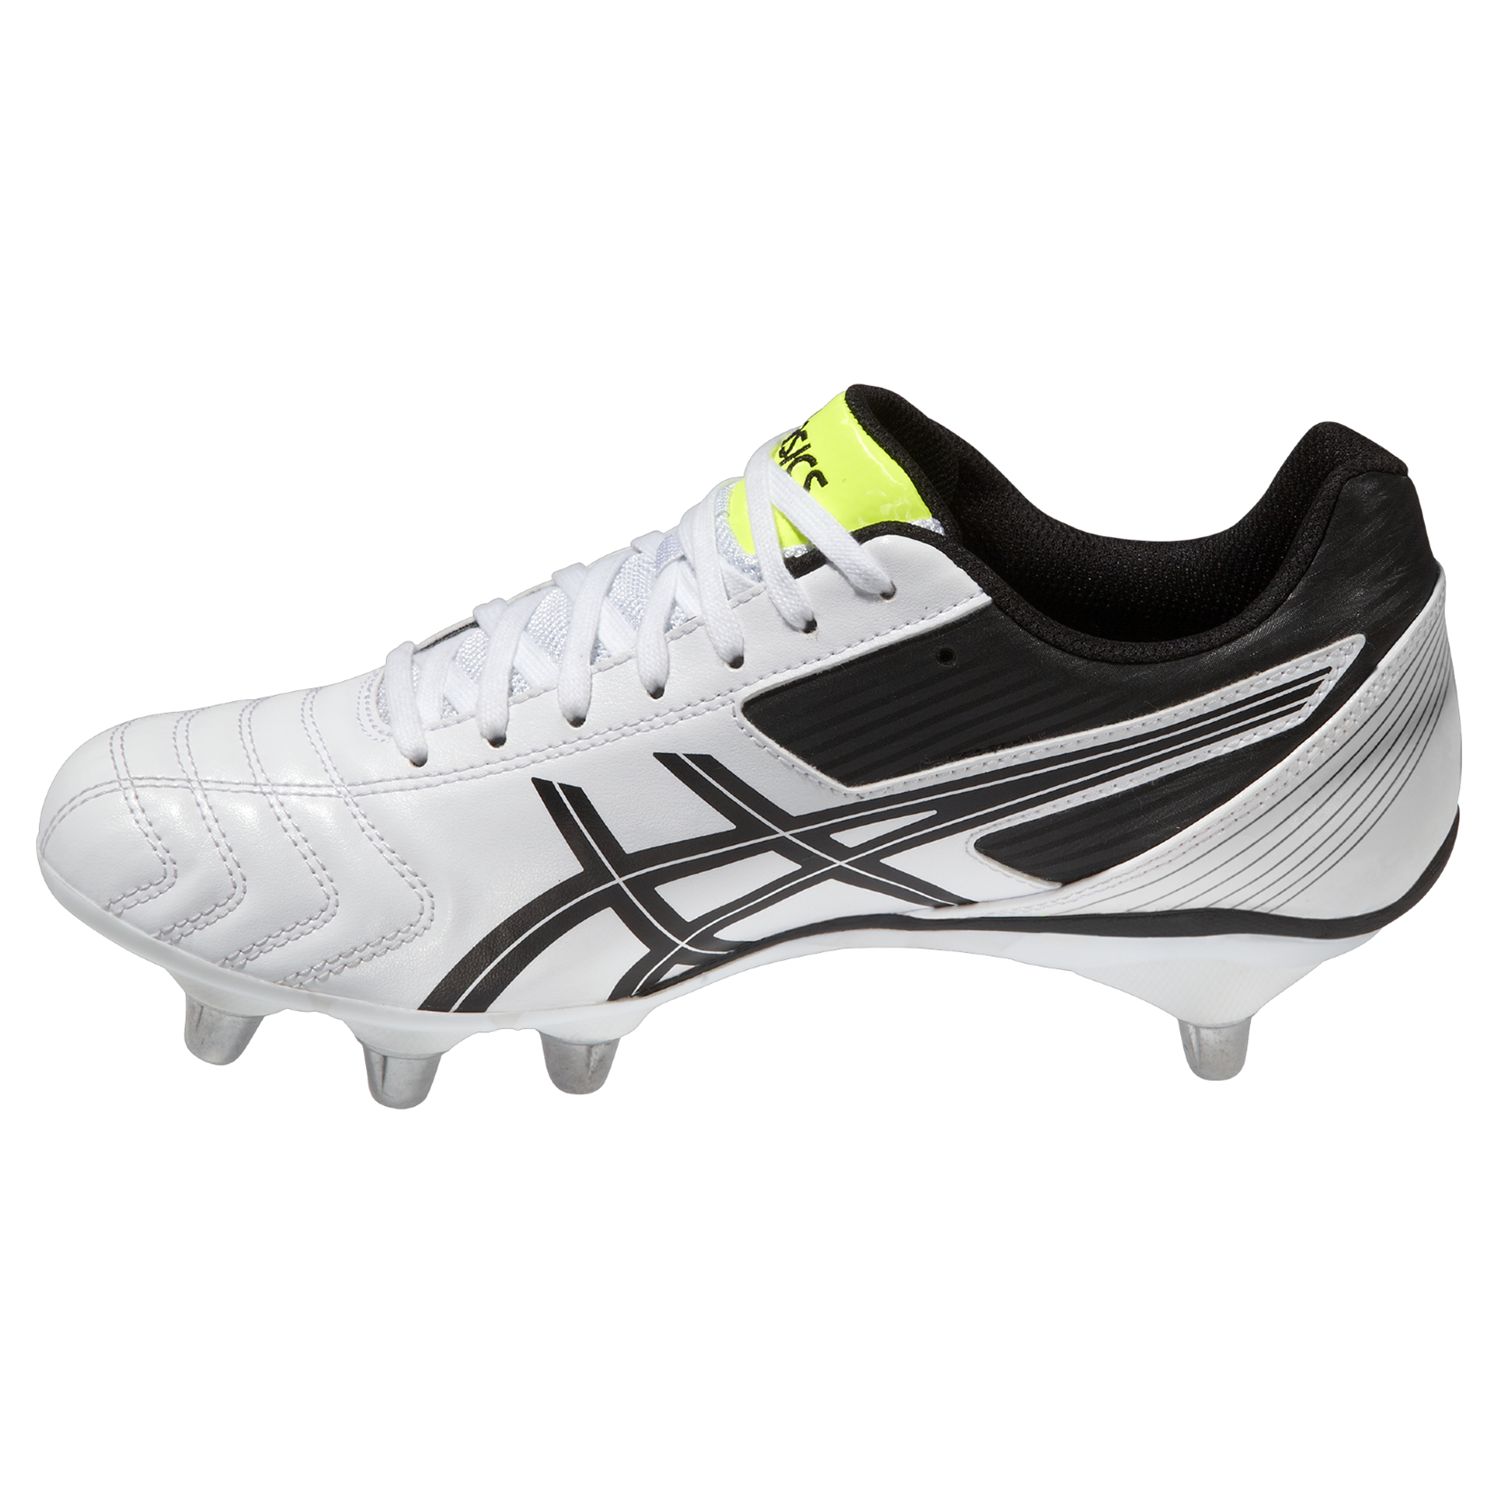 asics hybrid rugby boots